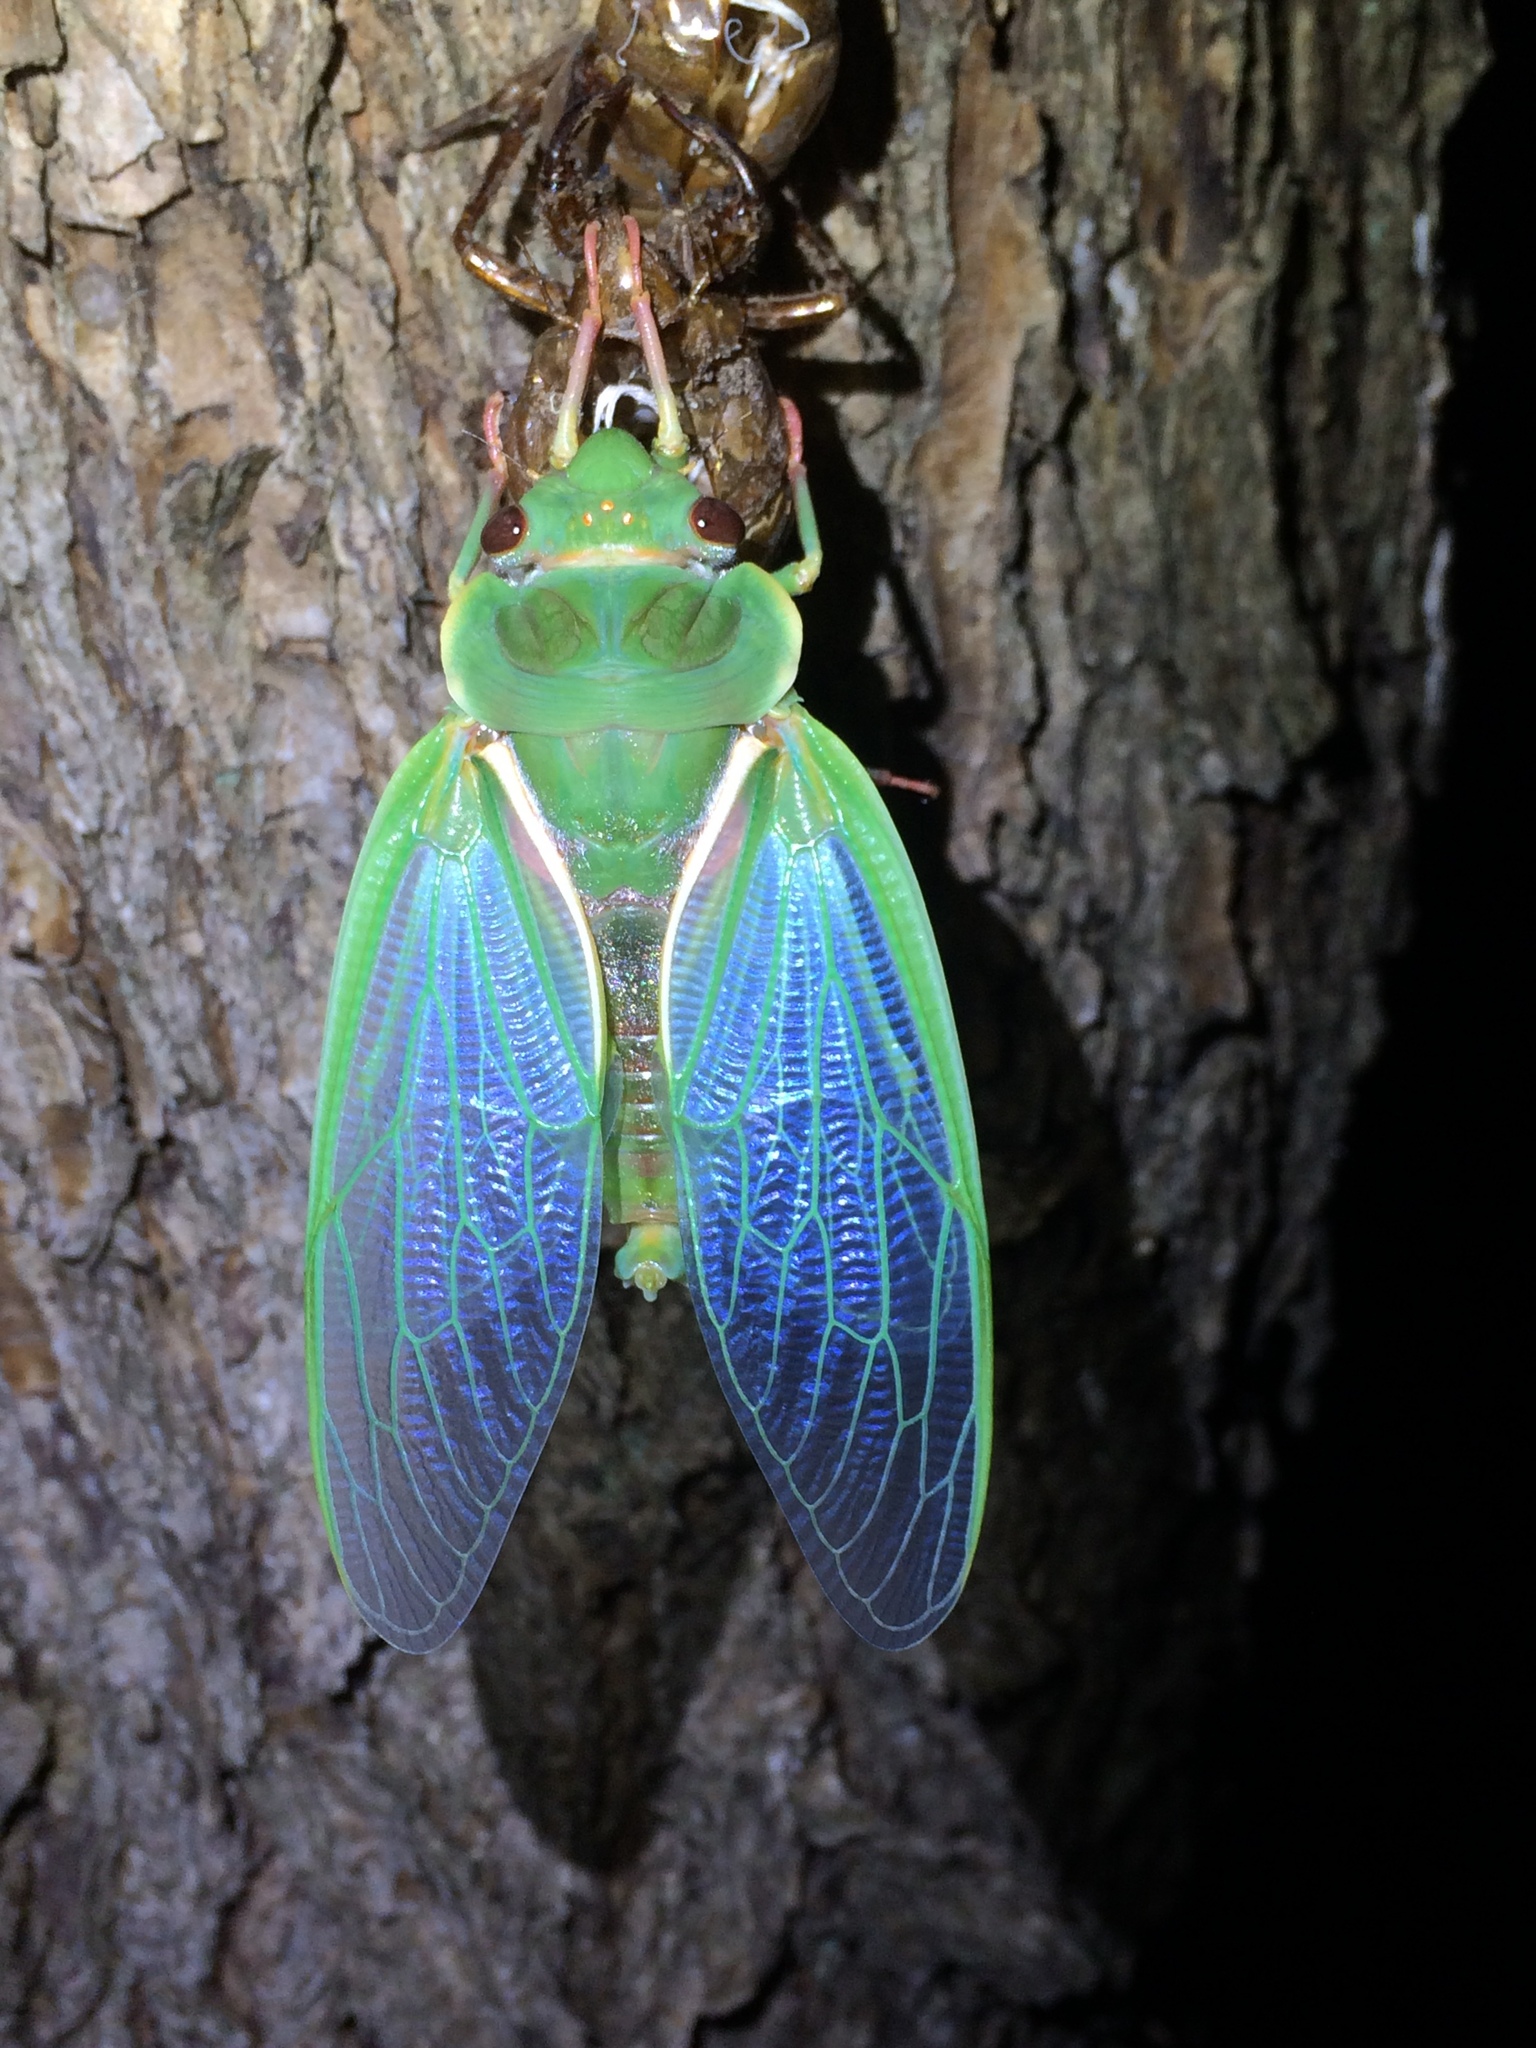 A bright green cicada recently shed on a tree trunk. Its wings fade from green to a translucent blue.